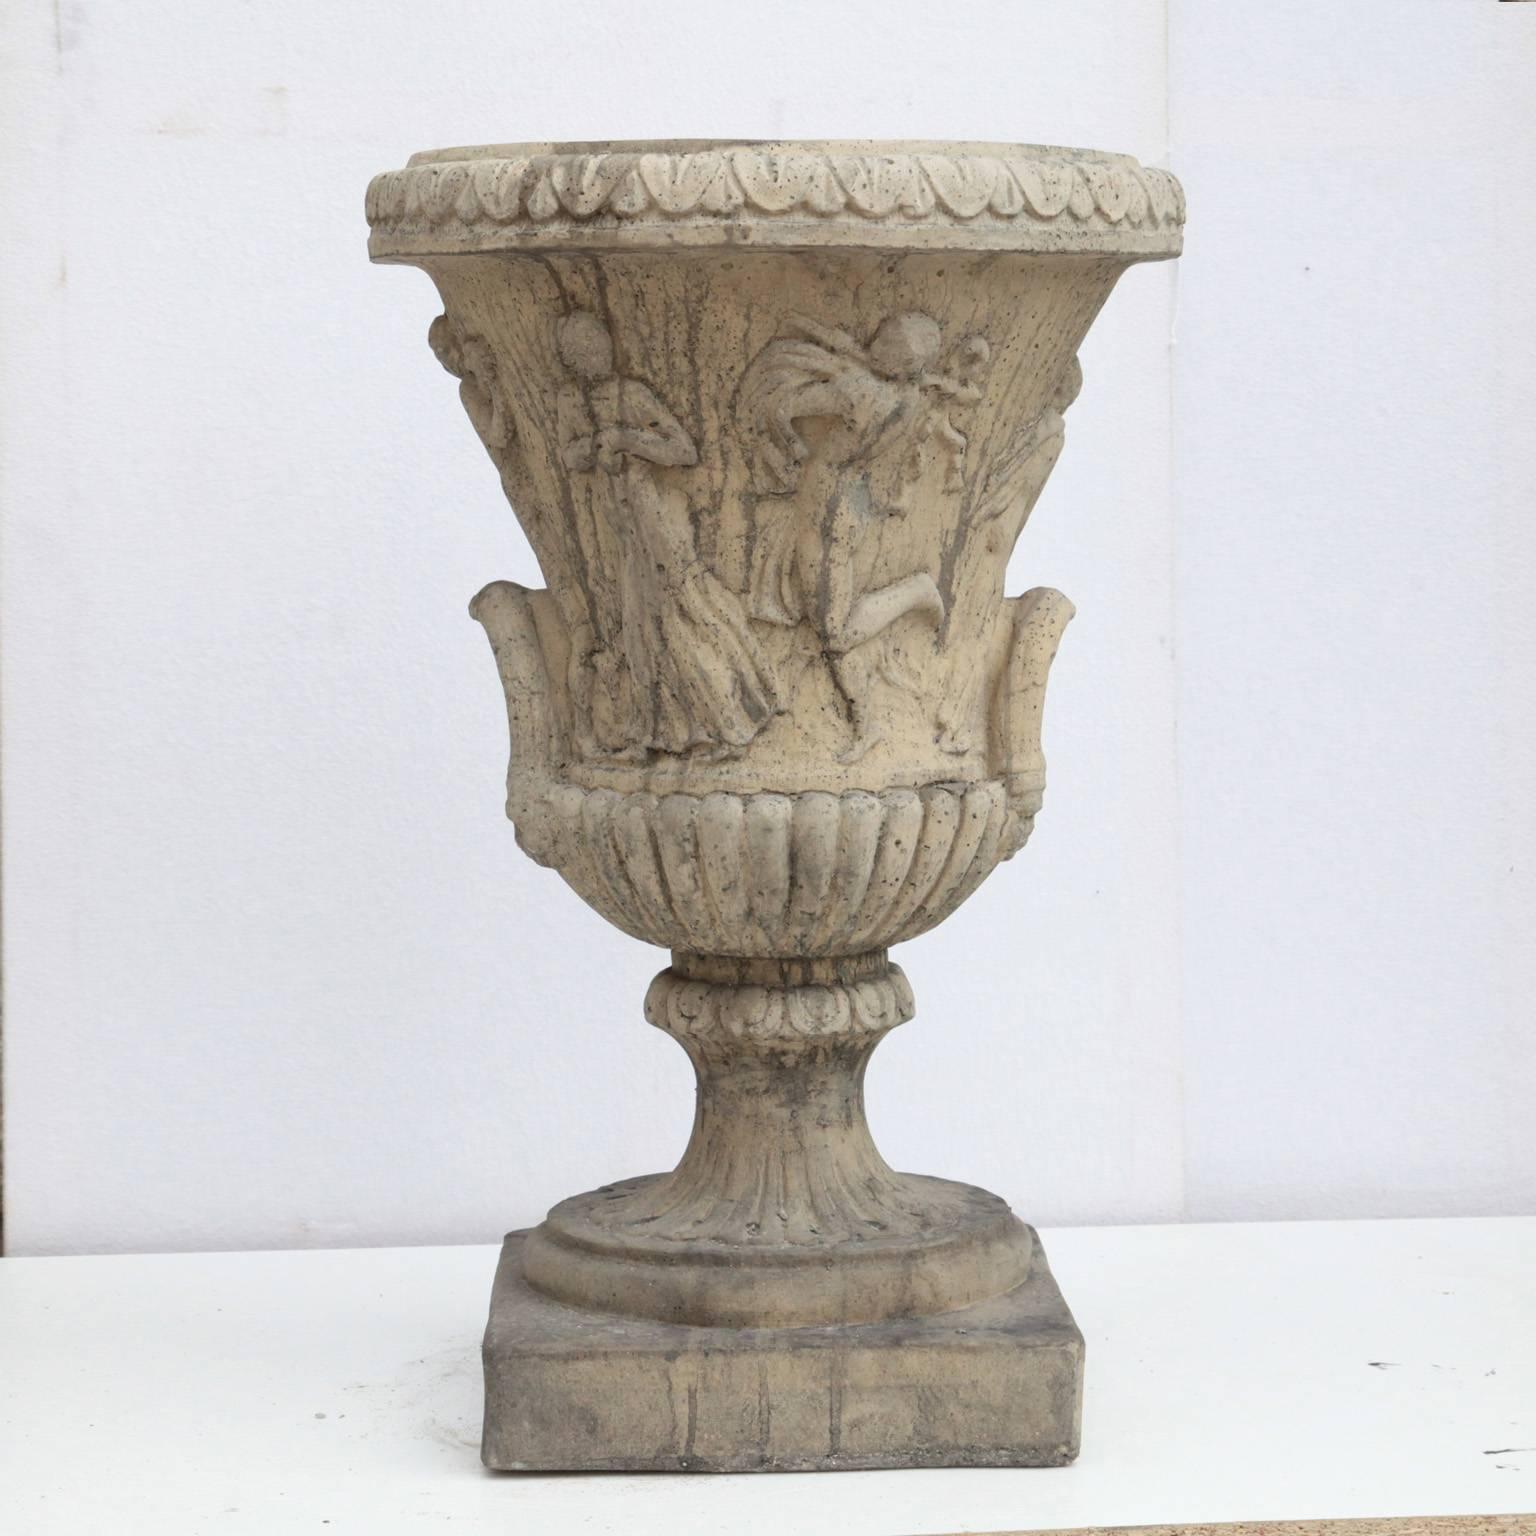 An Amphora with a depiction of an allegory. This planter is available in various colors including antique grey, antique white, sandstone and teracotta.